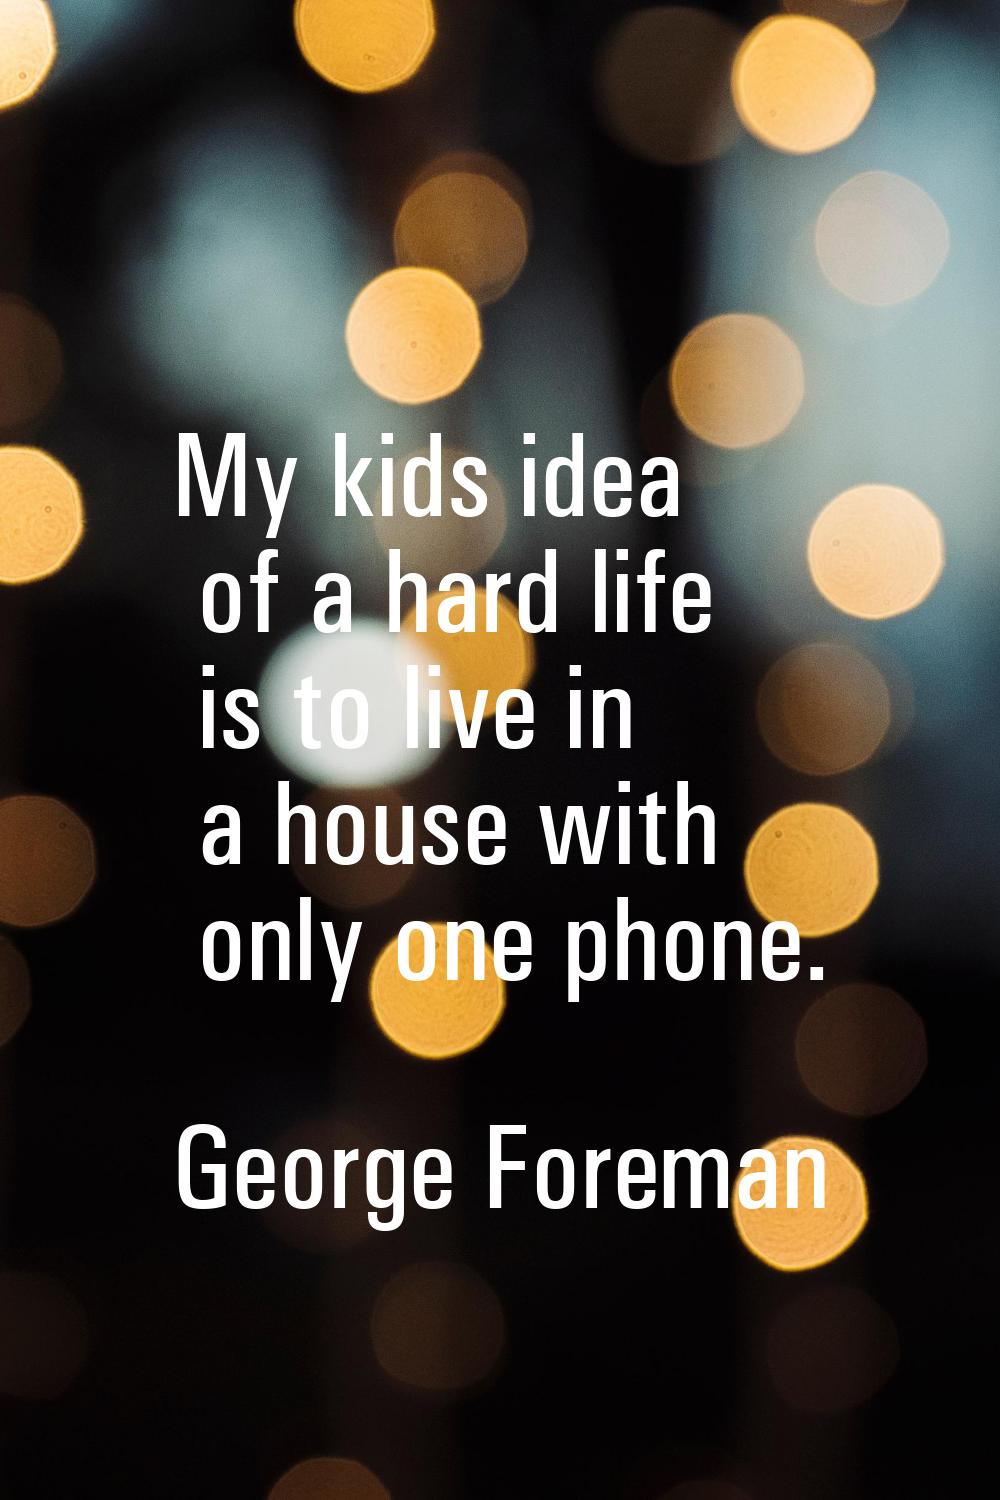 My kids idea of a hard life is to live in a house with only one phone.